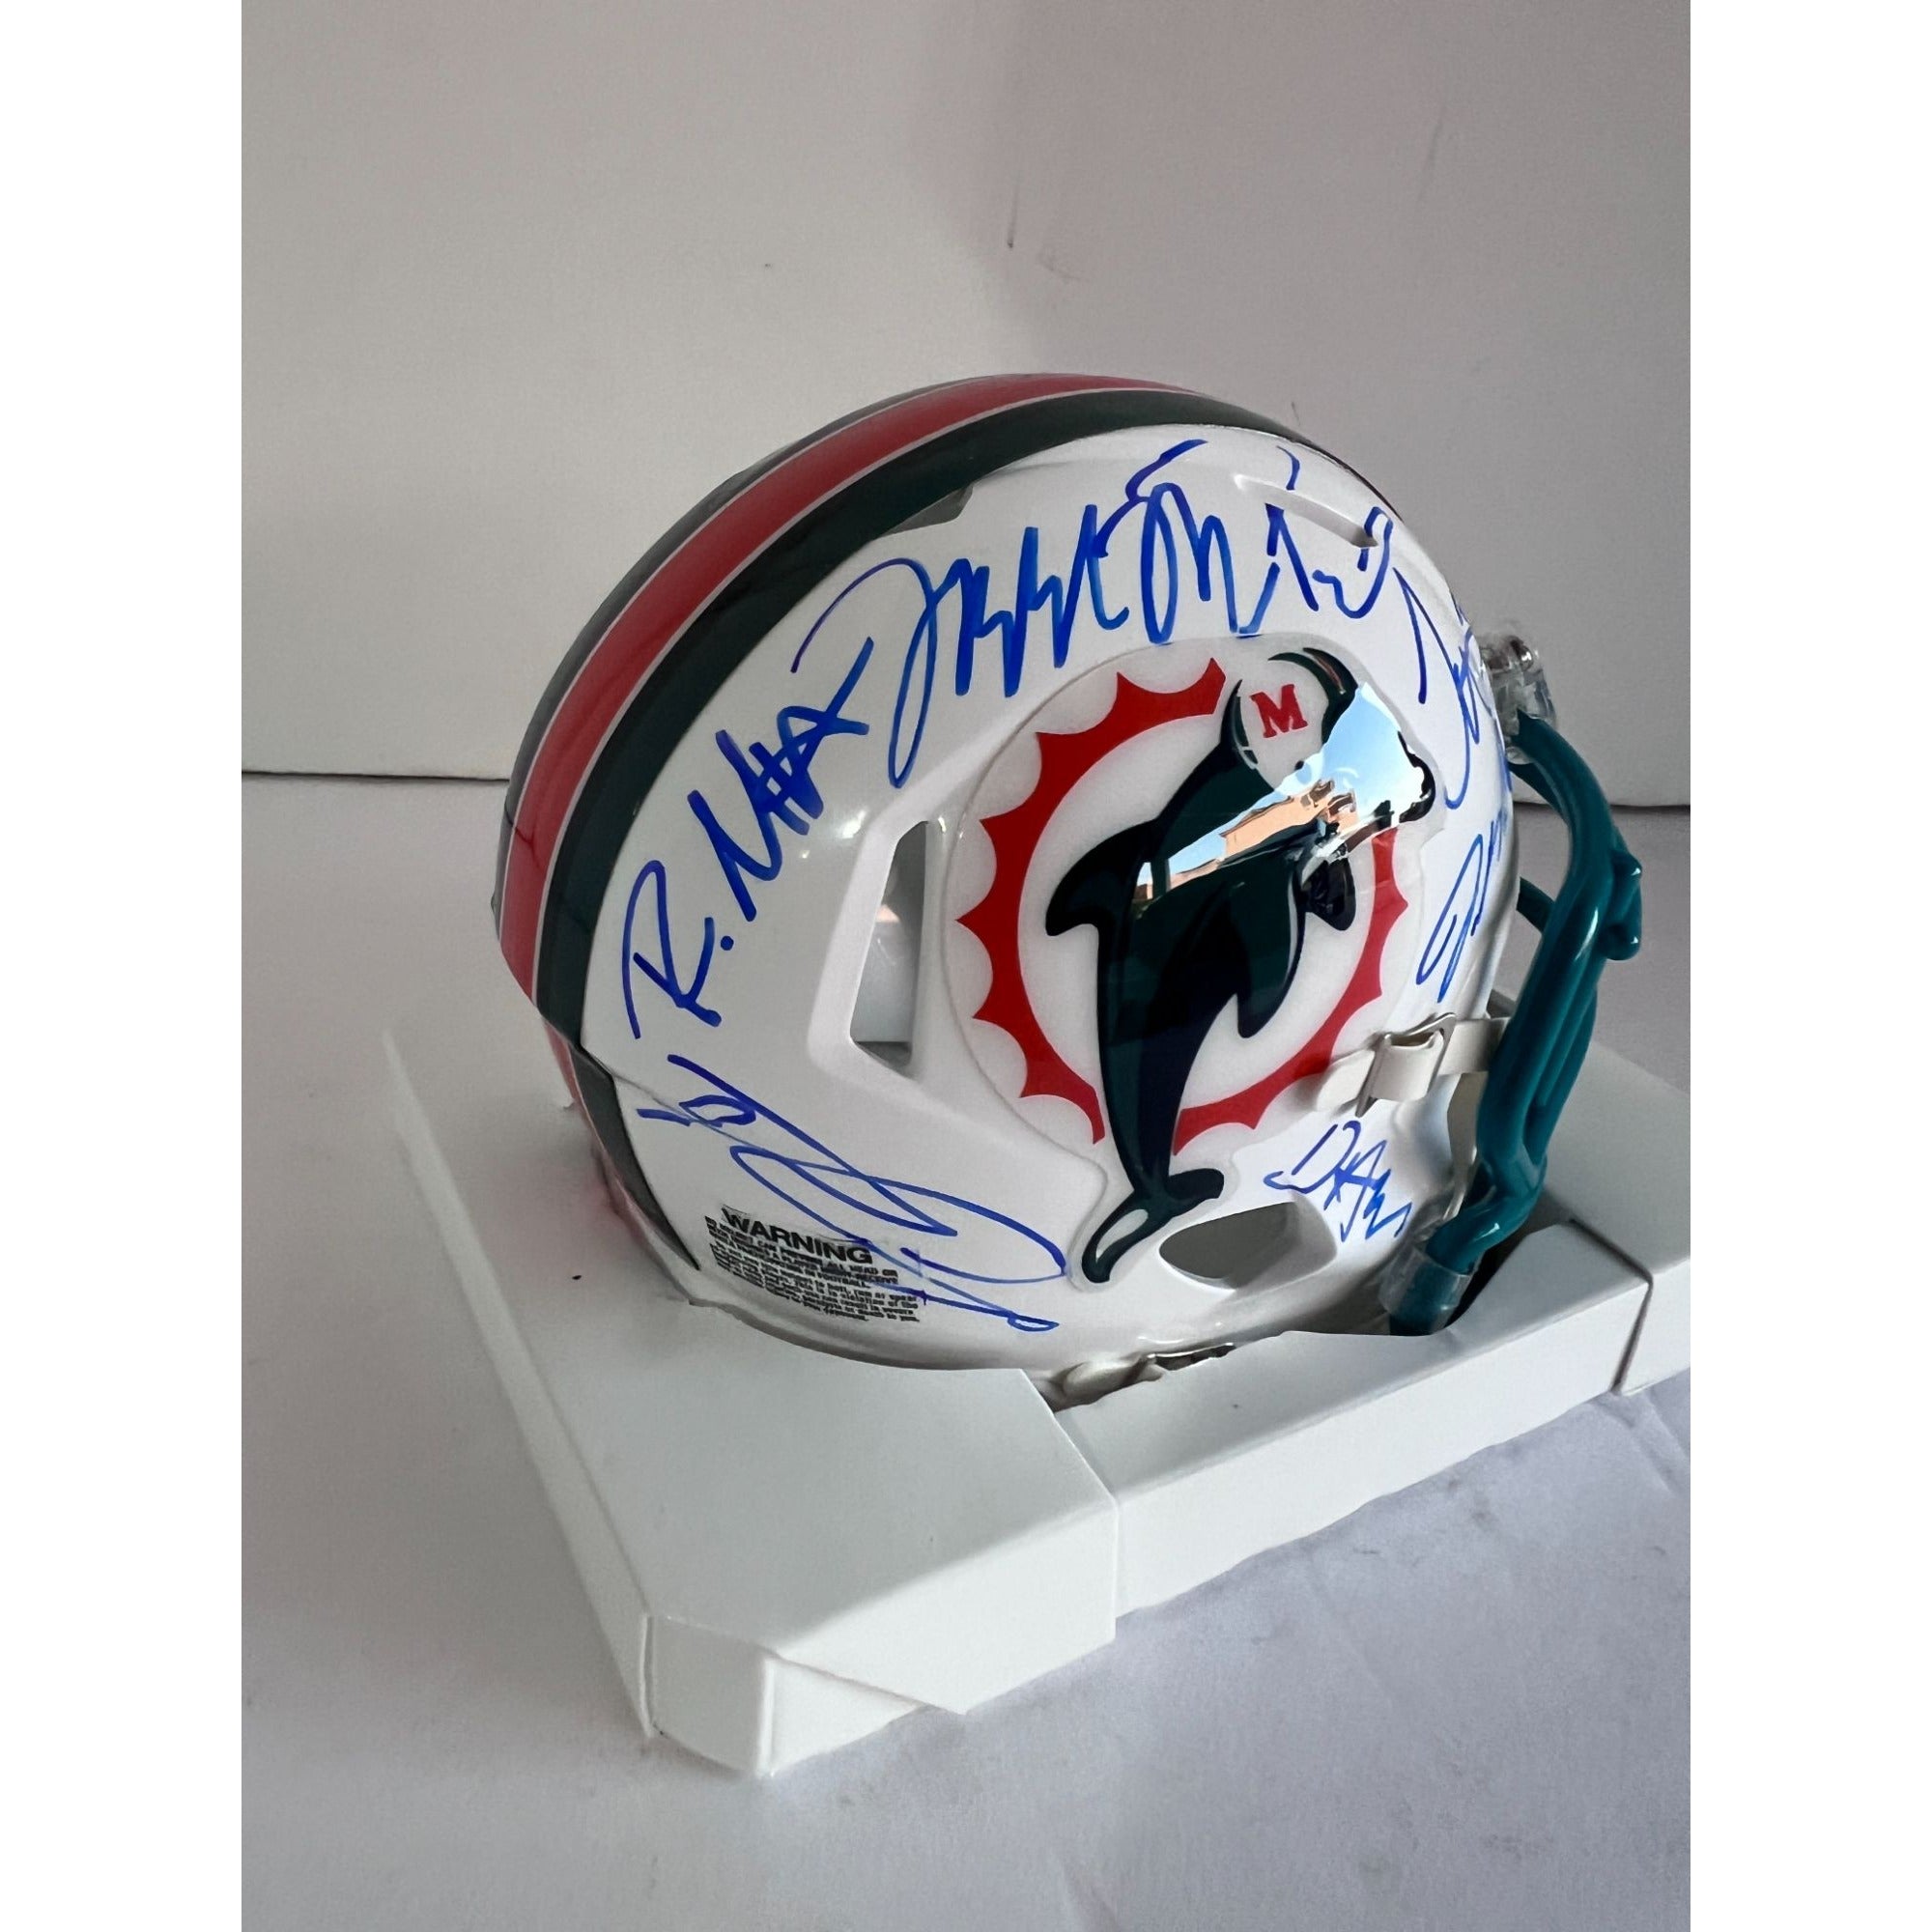 Miami Dolphins Tyreek Hill Jason Waddle Riddell mini helmet signed with proof